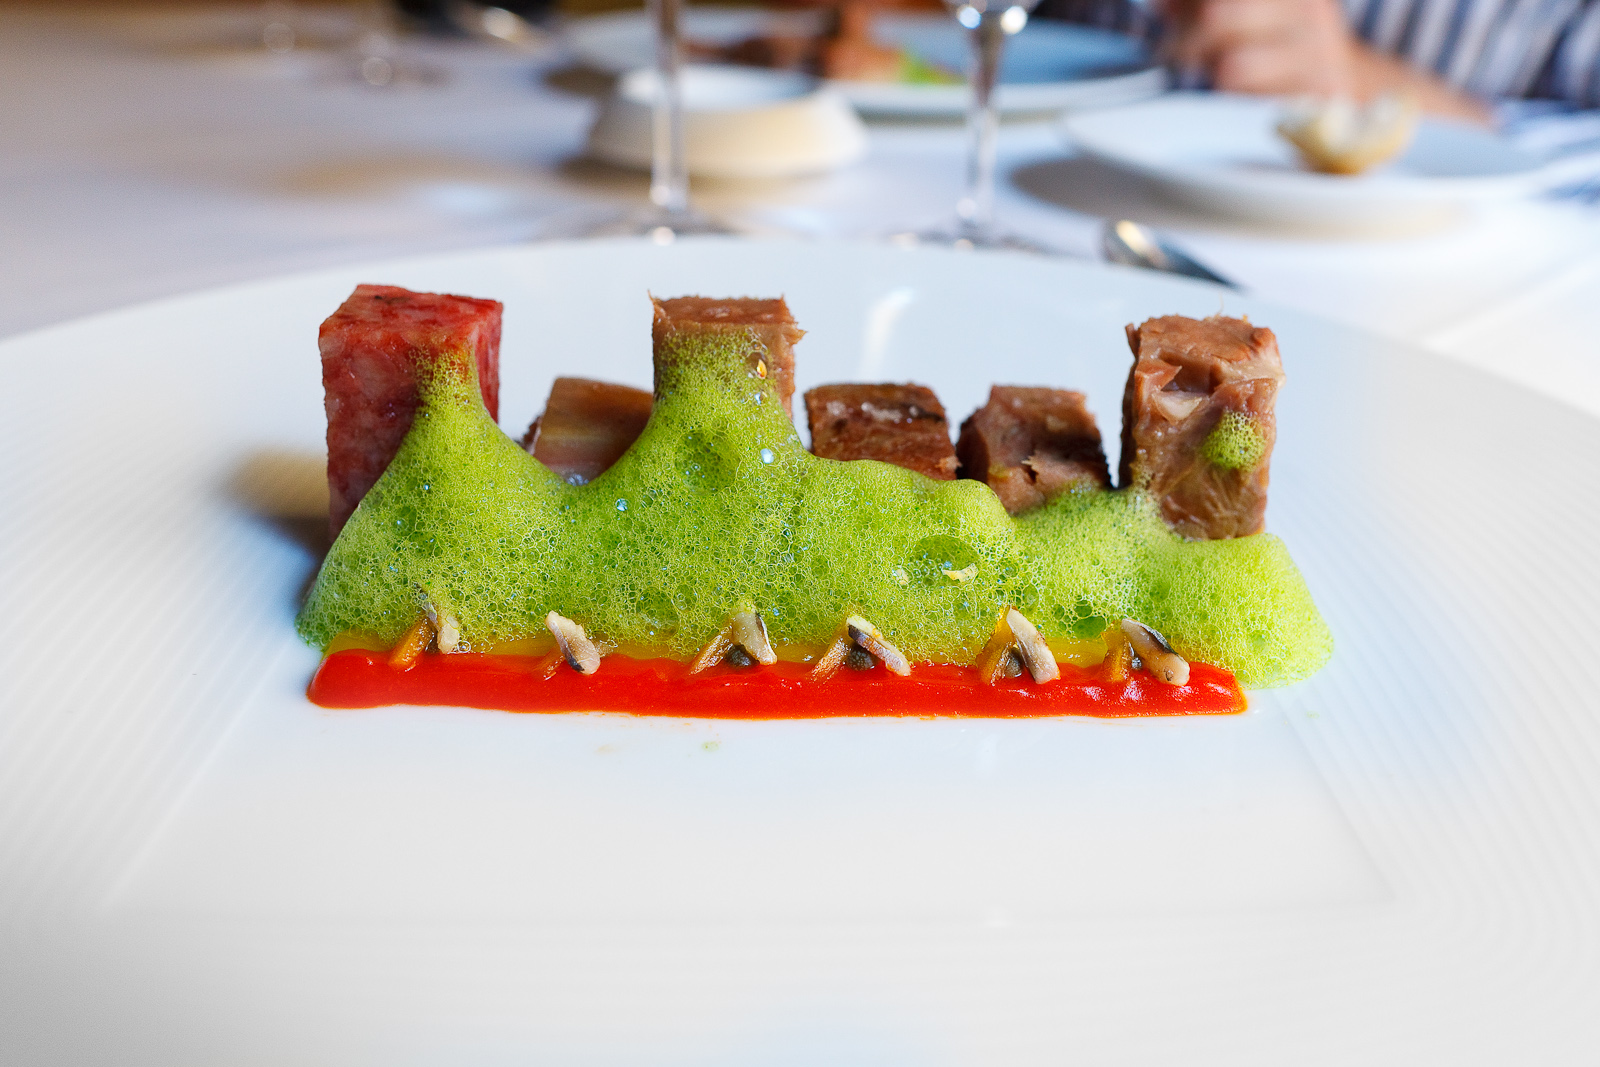 Osteria-Francescana-Italy-Boiled-meats-not-boiled copy